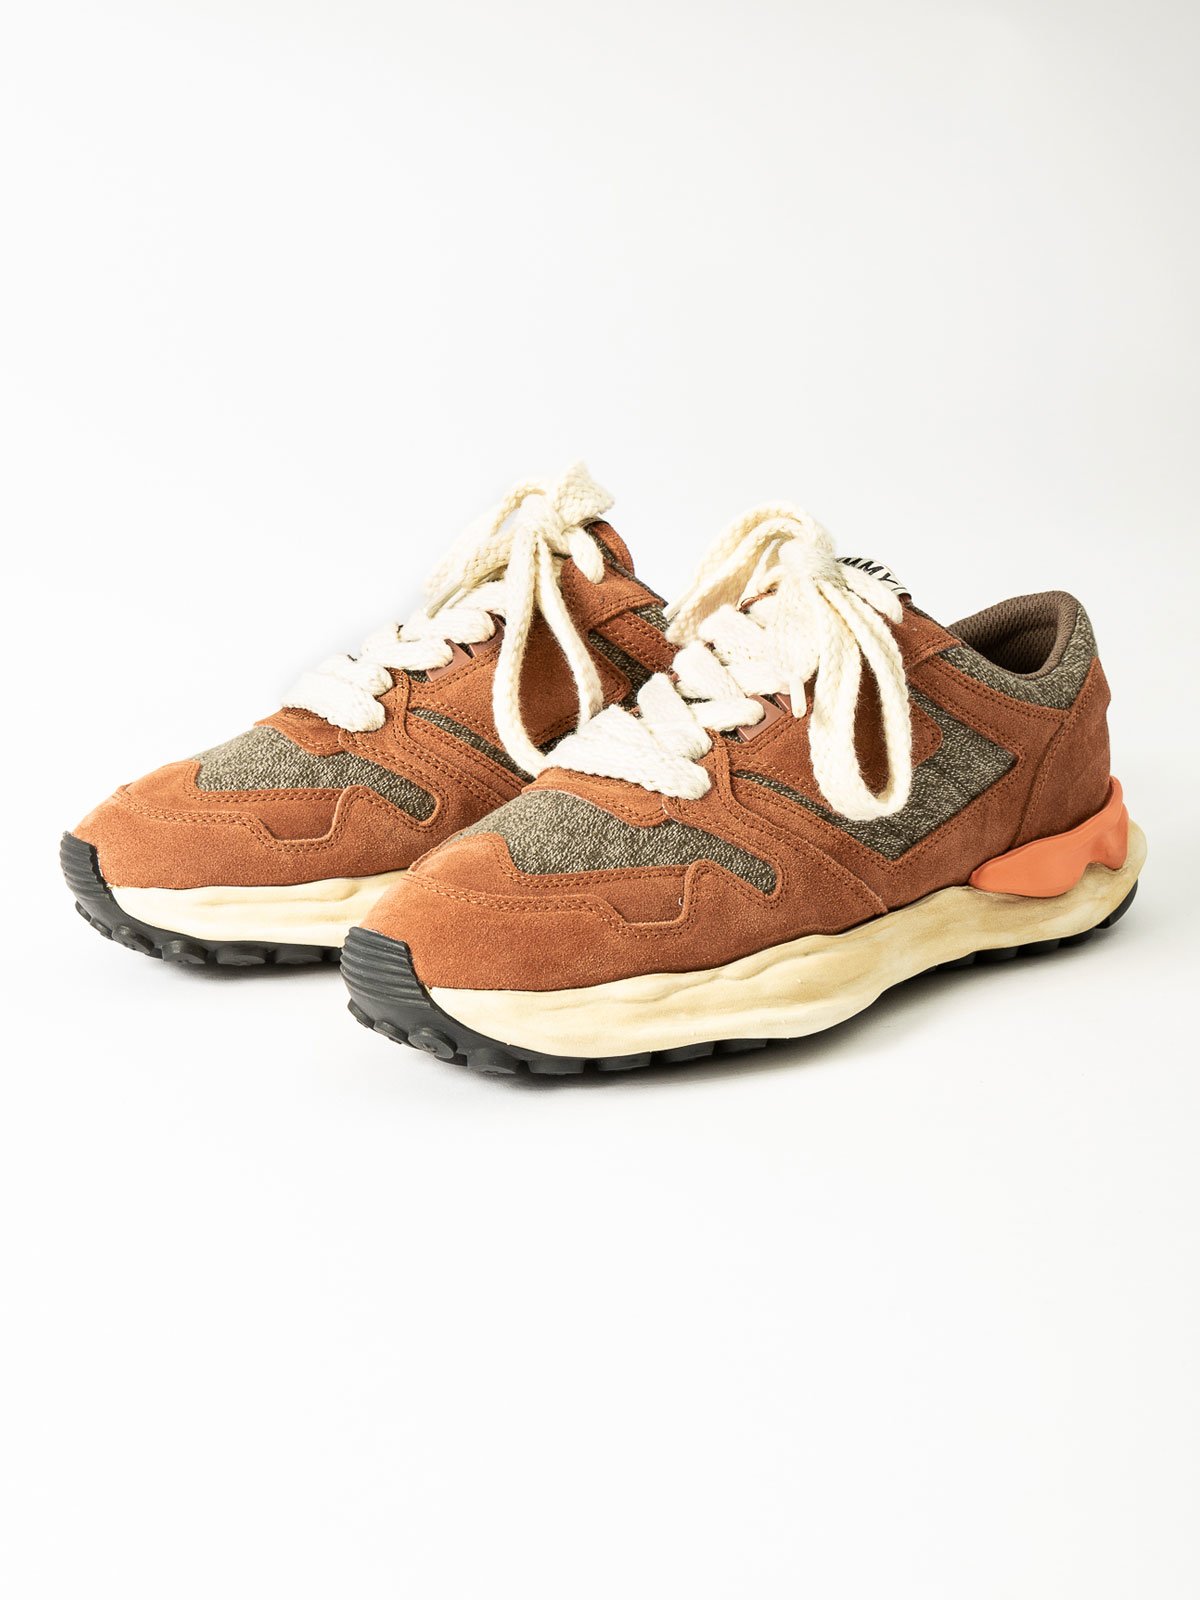 nigel cabourn mihara sneakers lacets baskets épais